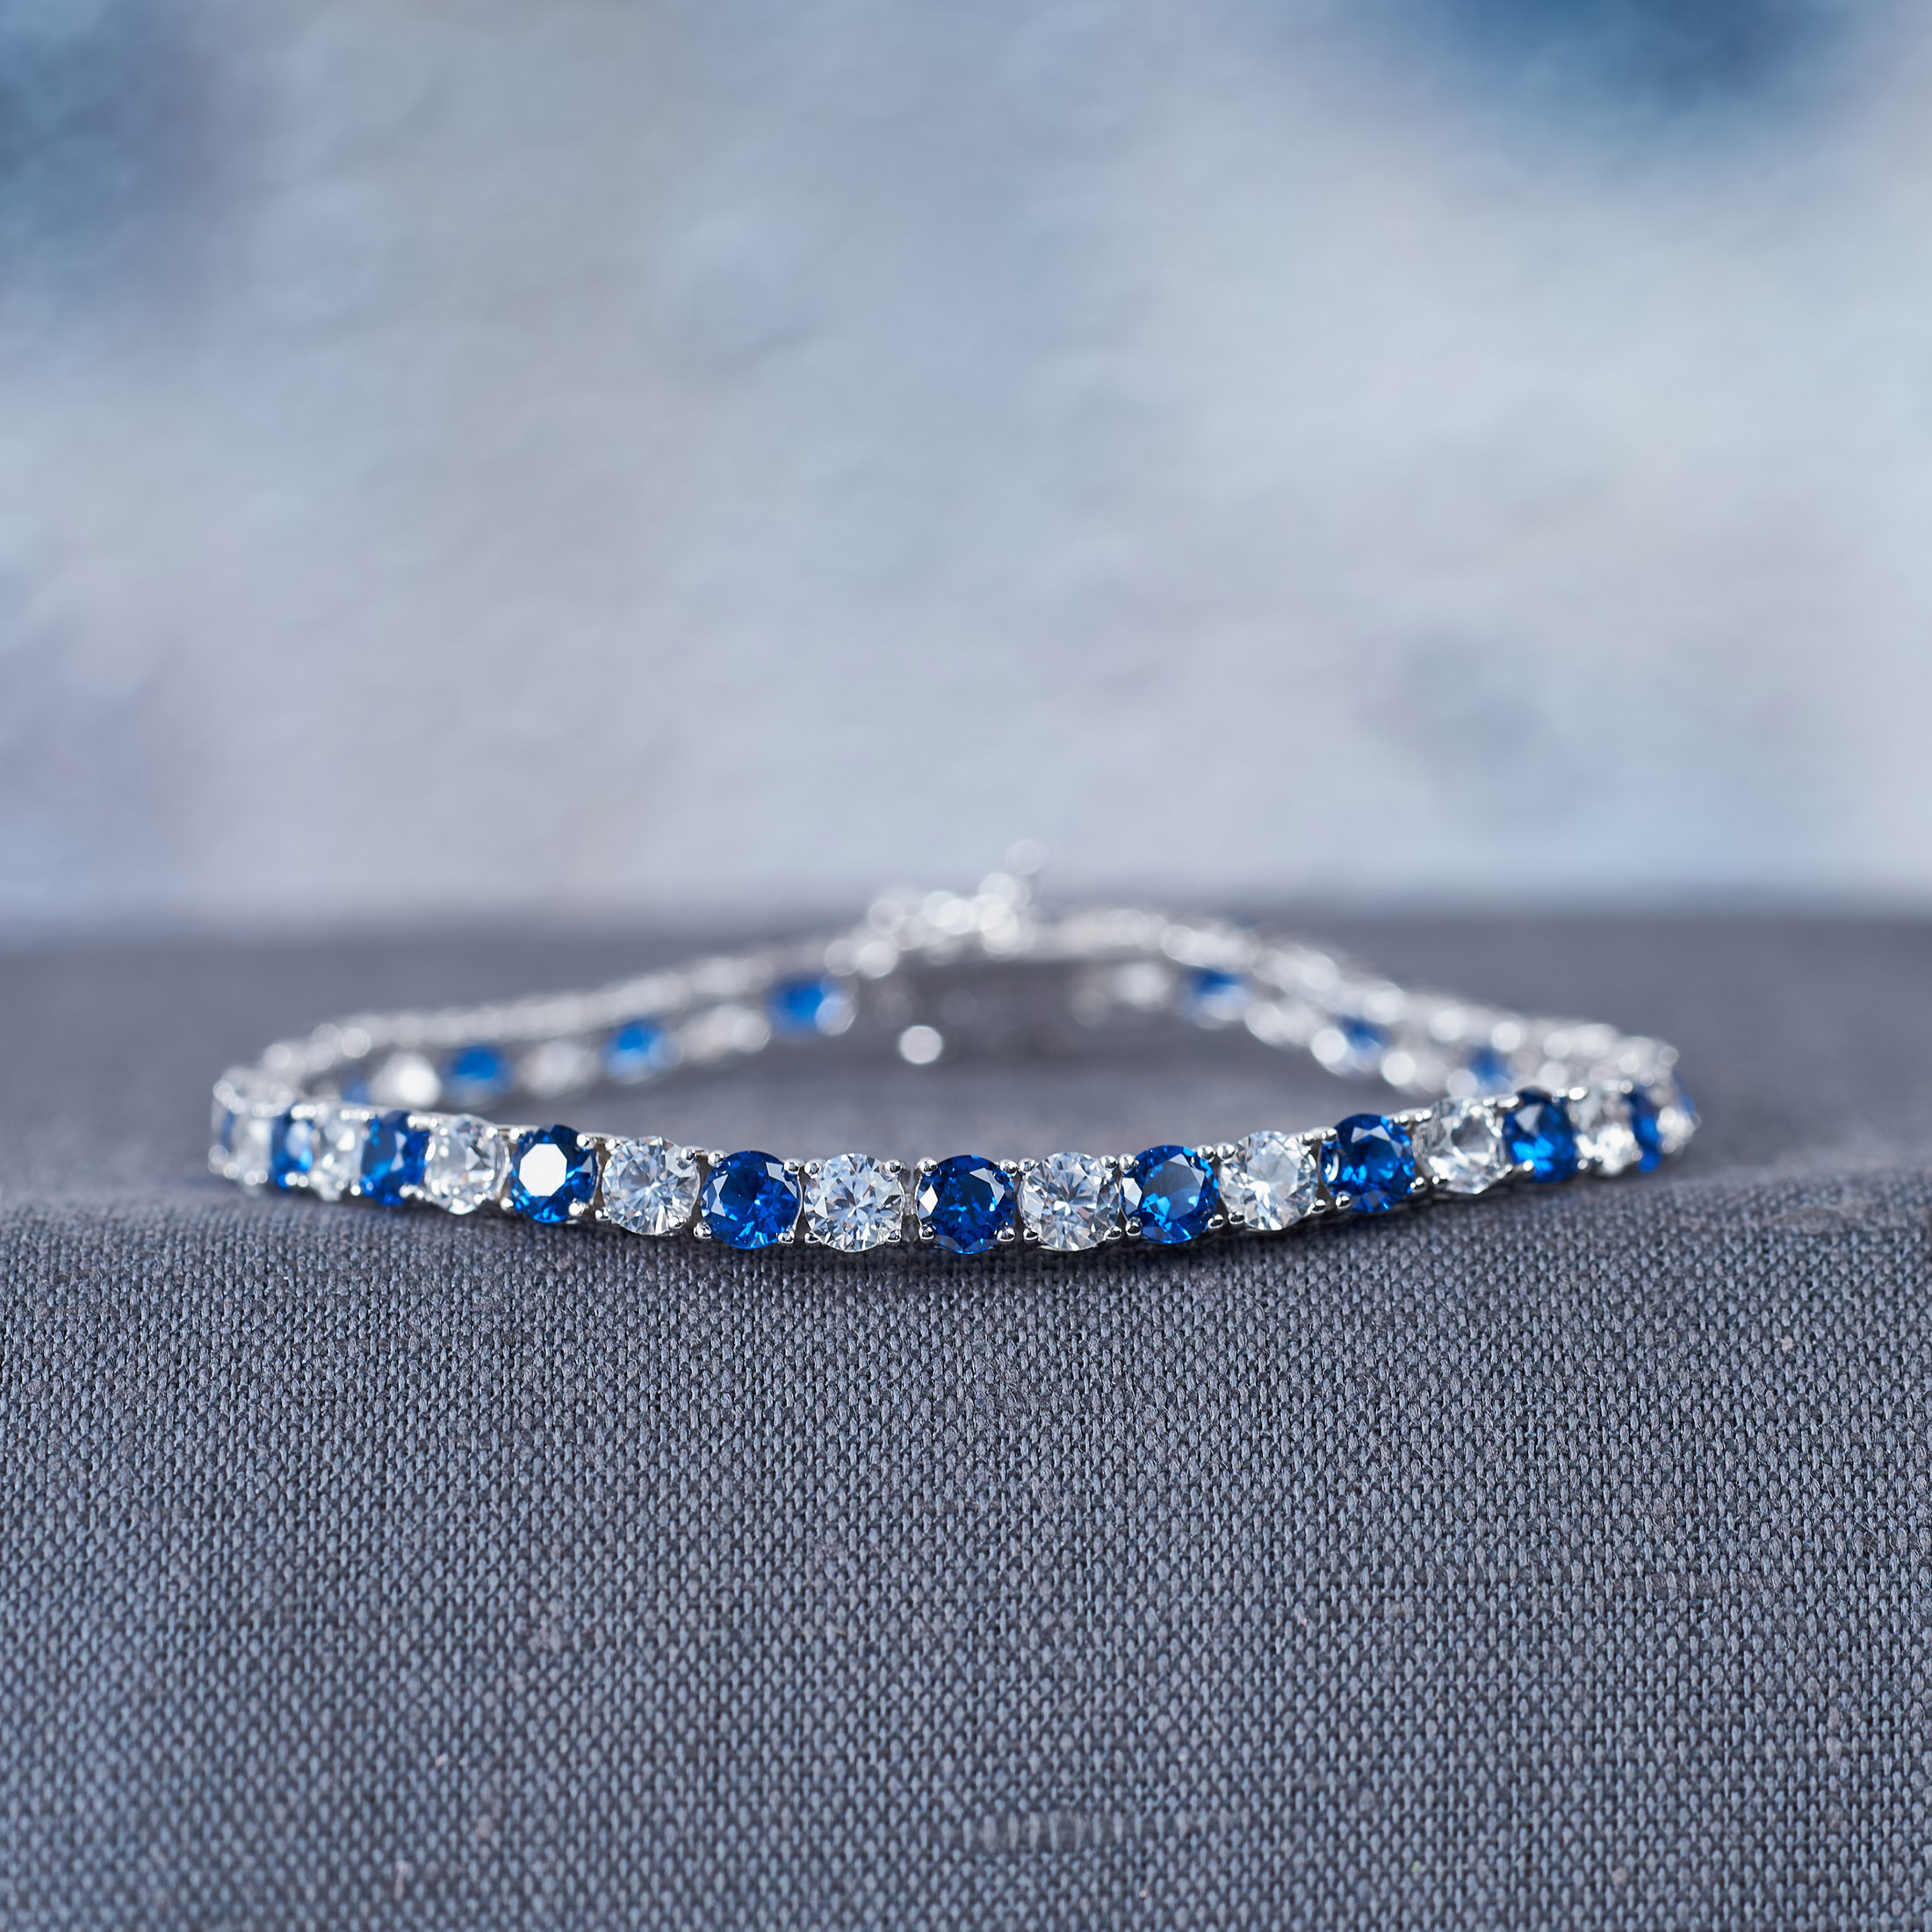 Everly Women's 14-1/4 Carat T.G.W. Created Blue & White Sapphire Sterling Silver Tennis Bracelet - image 1 of 9